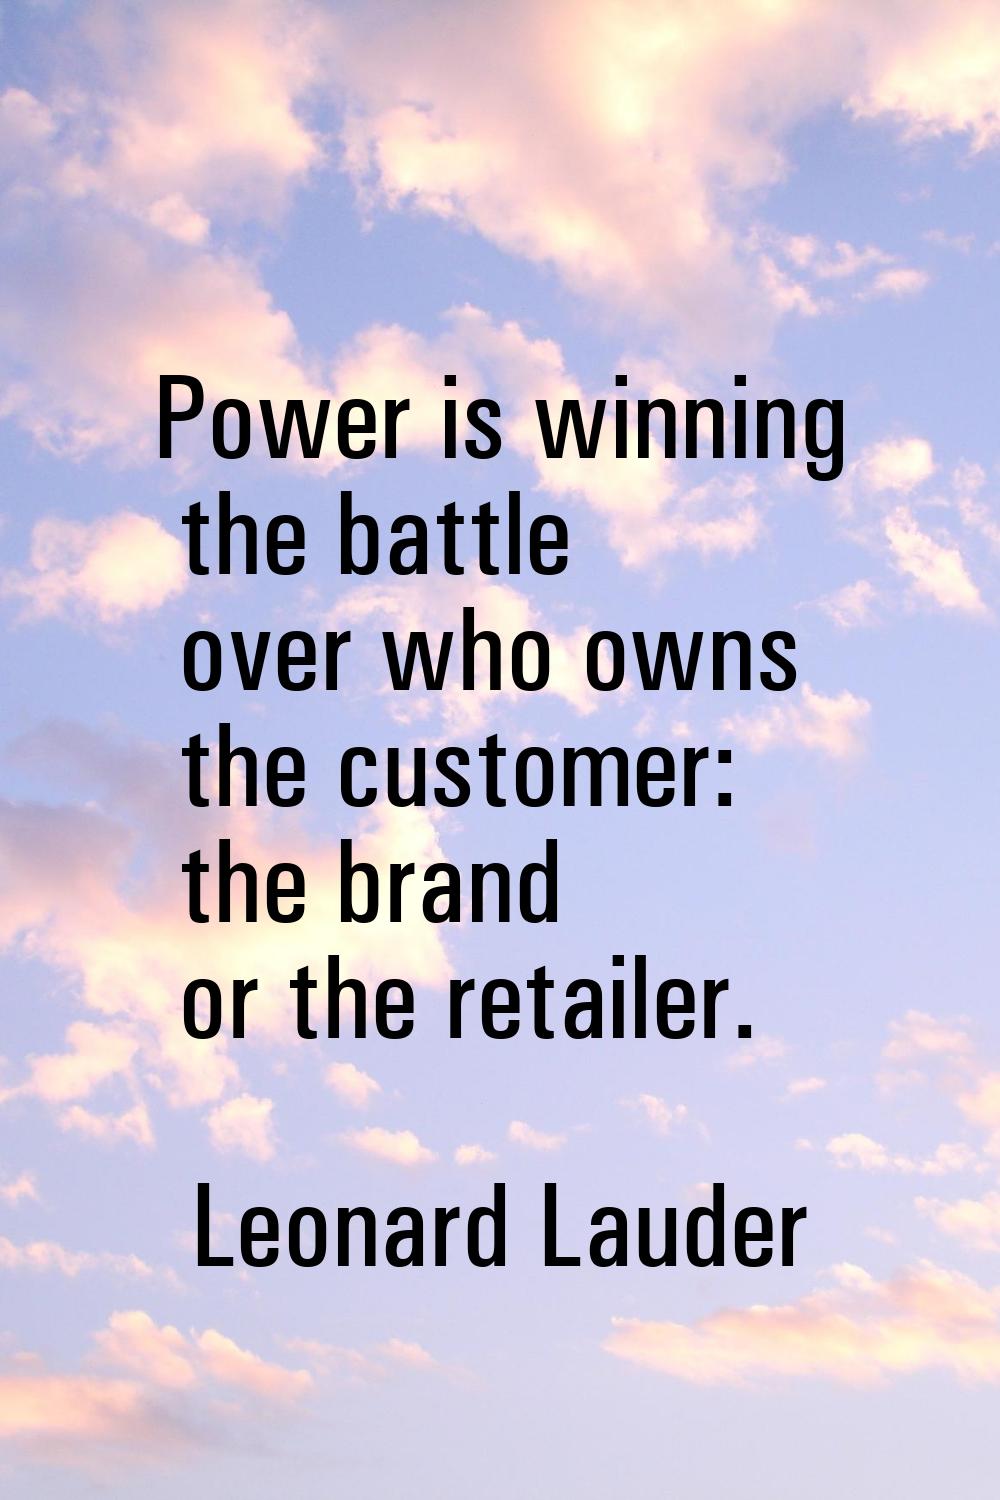 Power is winning the battle over who owns the customer: the brand or the retailer.